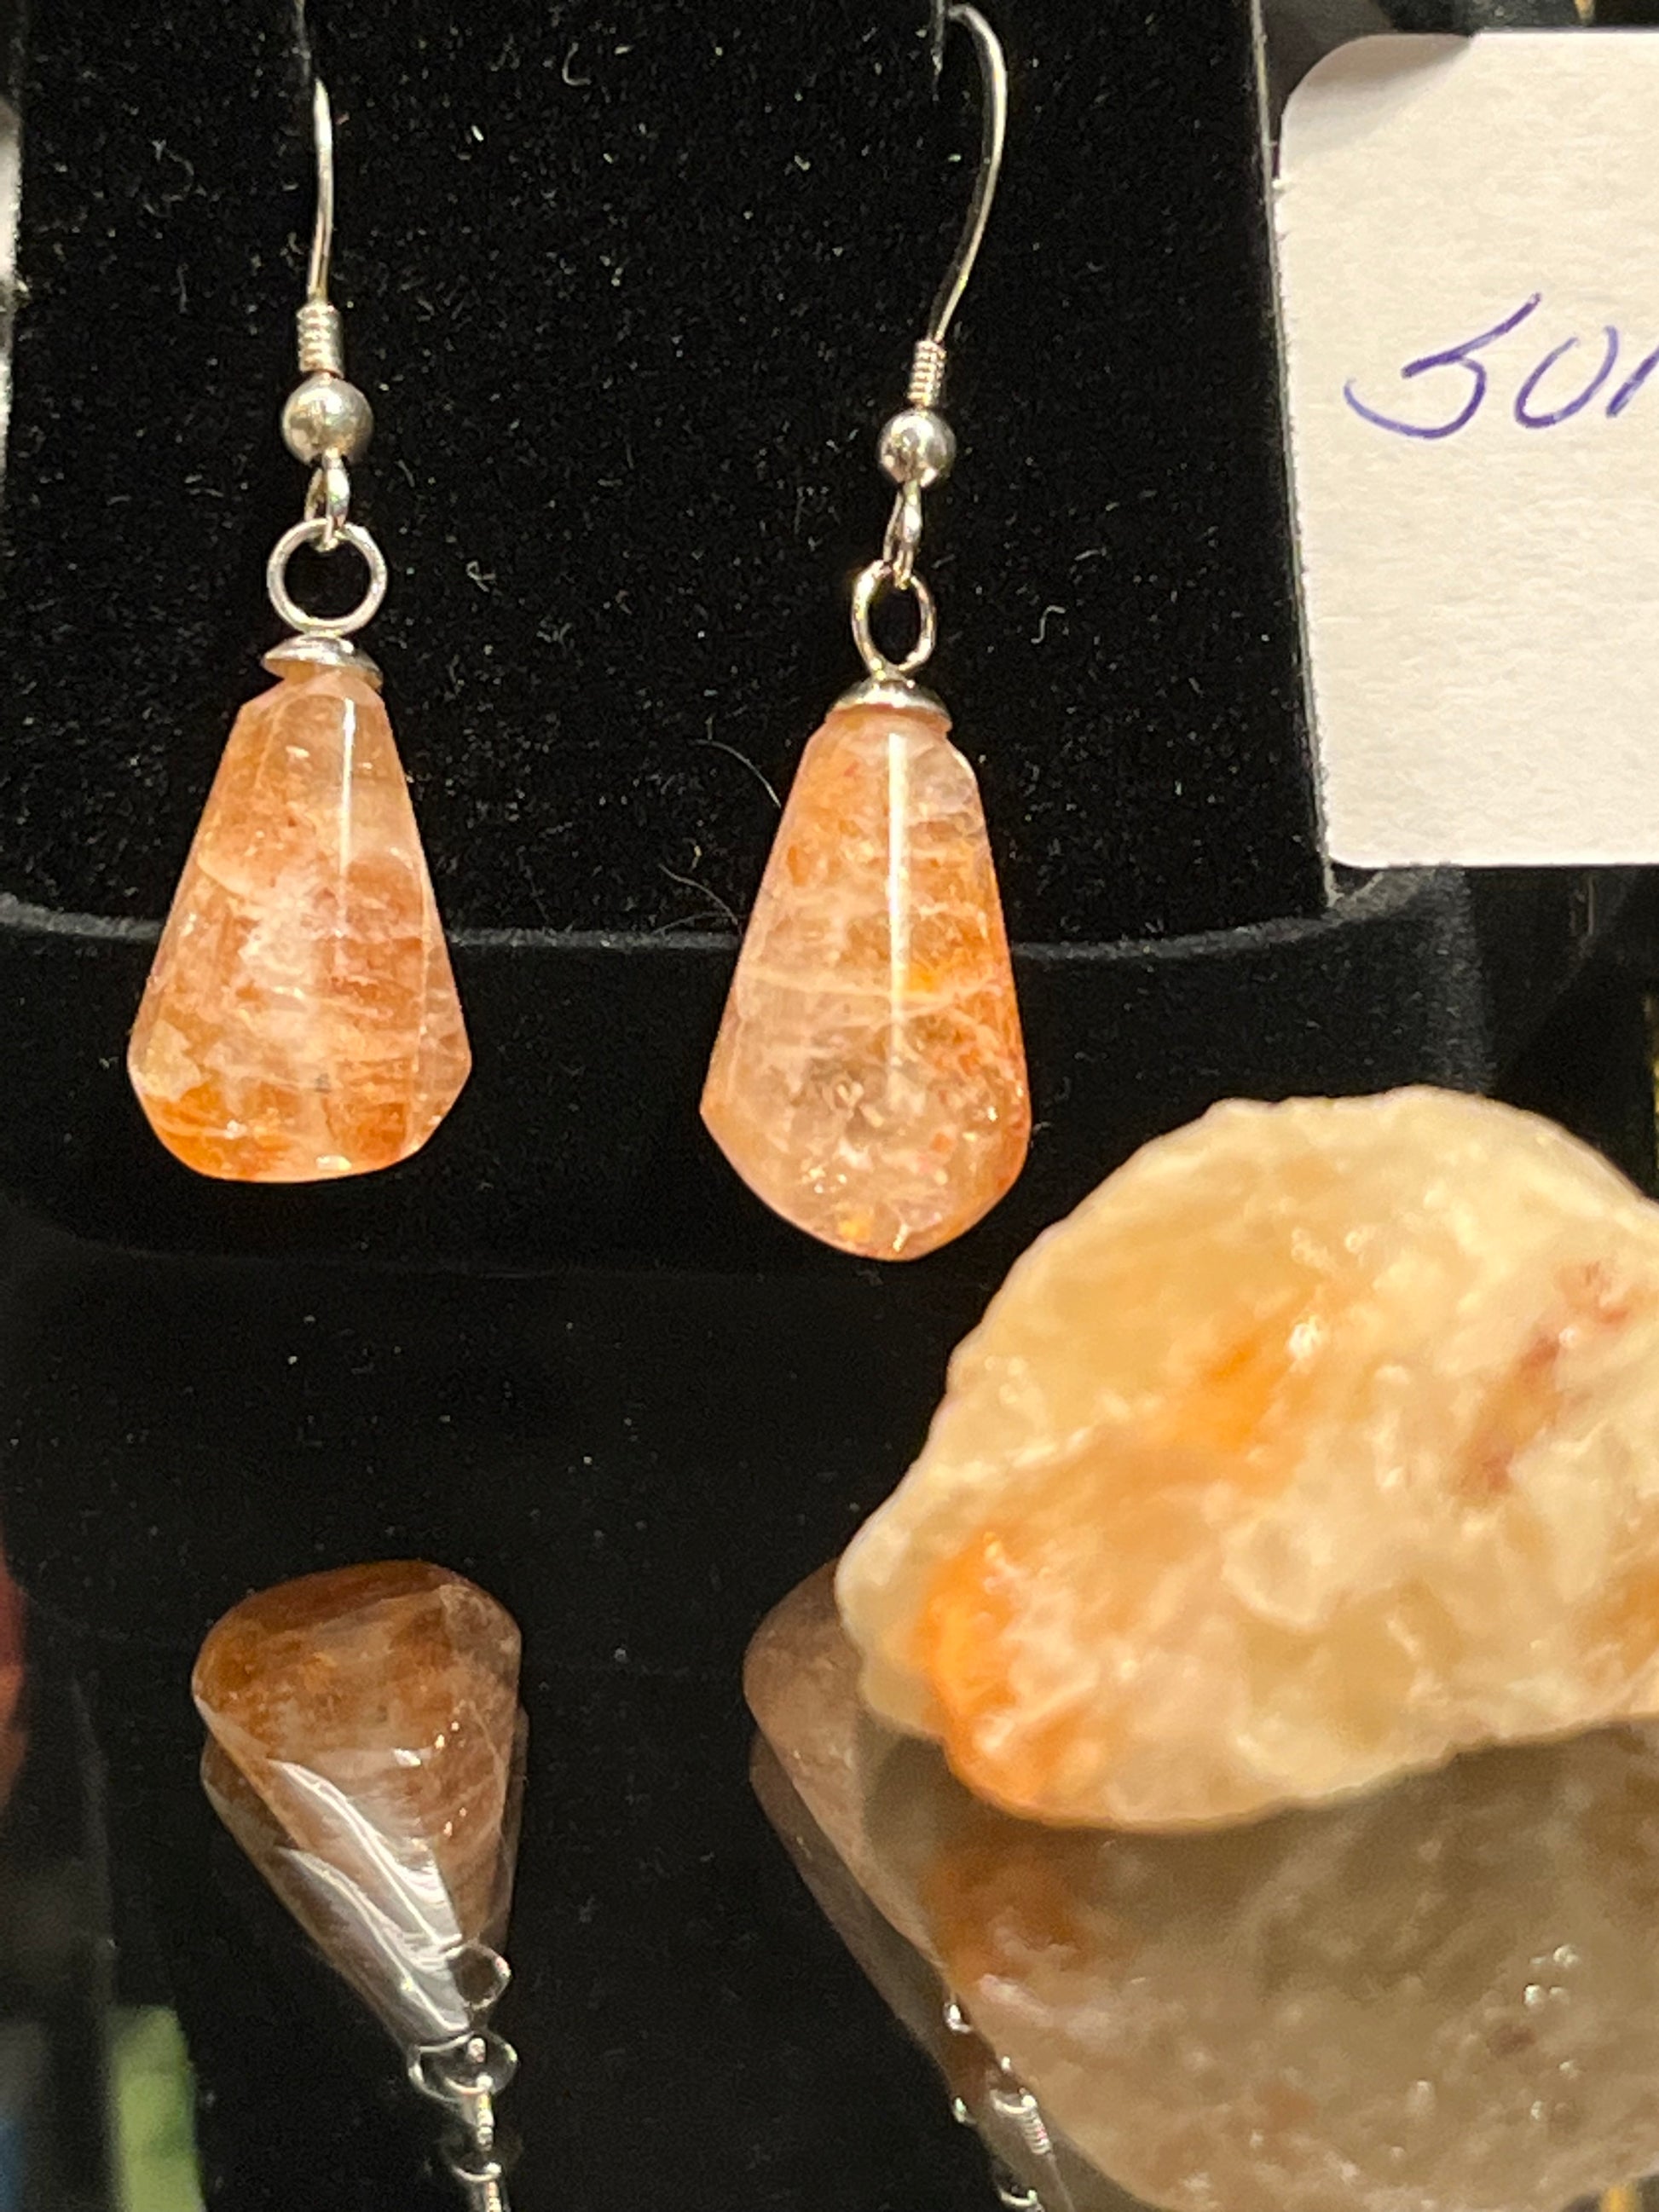 Pear-shaped sunstone earrings on silver. This unique piece of jewelry is authentic Alaska Native art created by an enrolled member of an Alaska Native tribe and is a certified Made in Alaska item. 